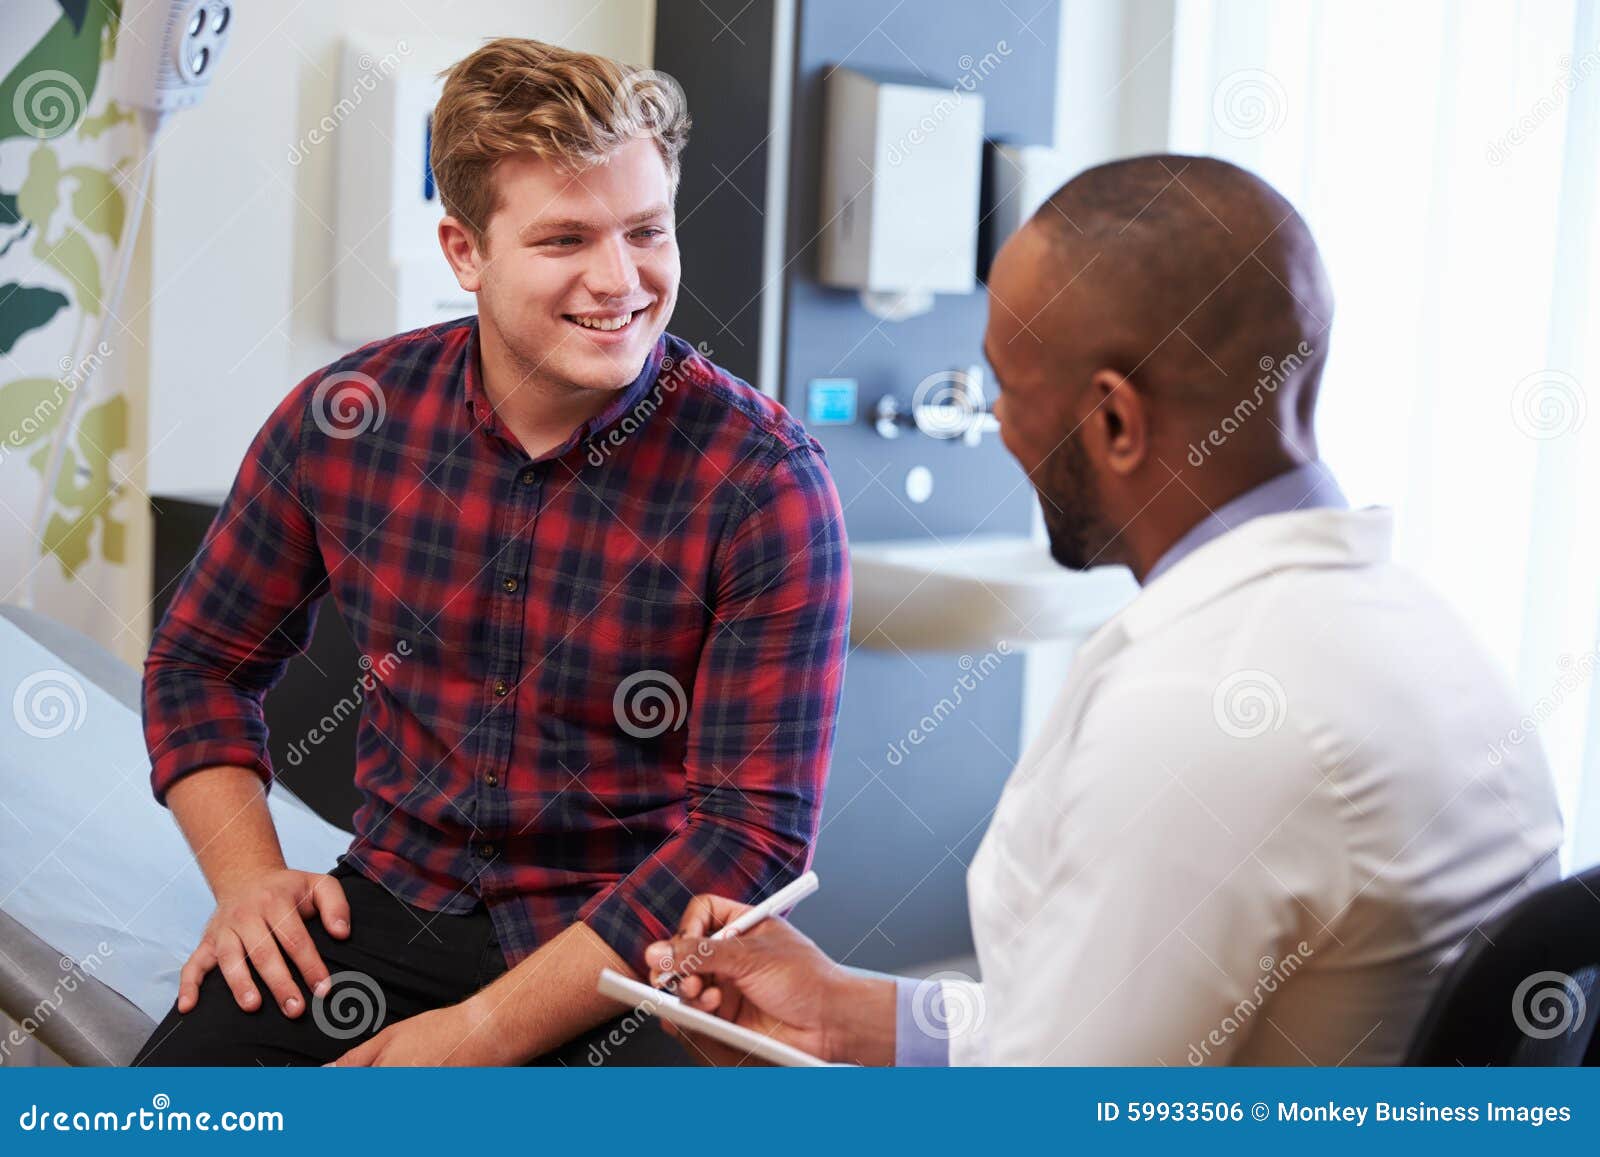 male patient and doctor have consultation in hospital room